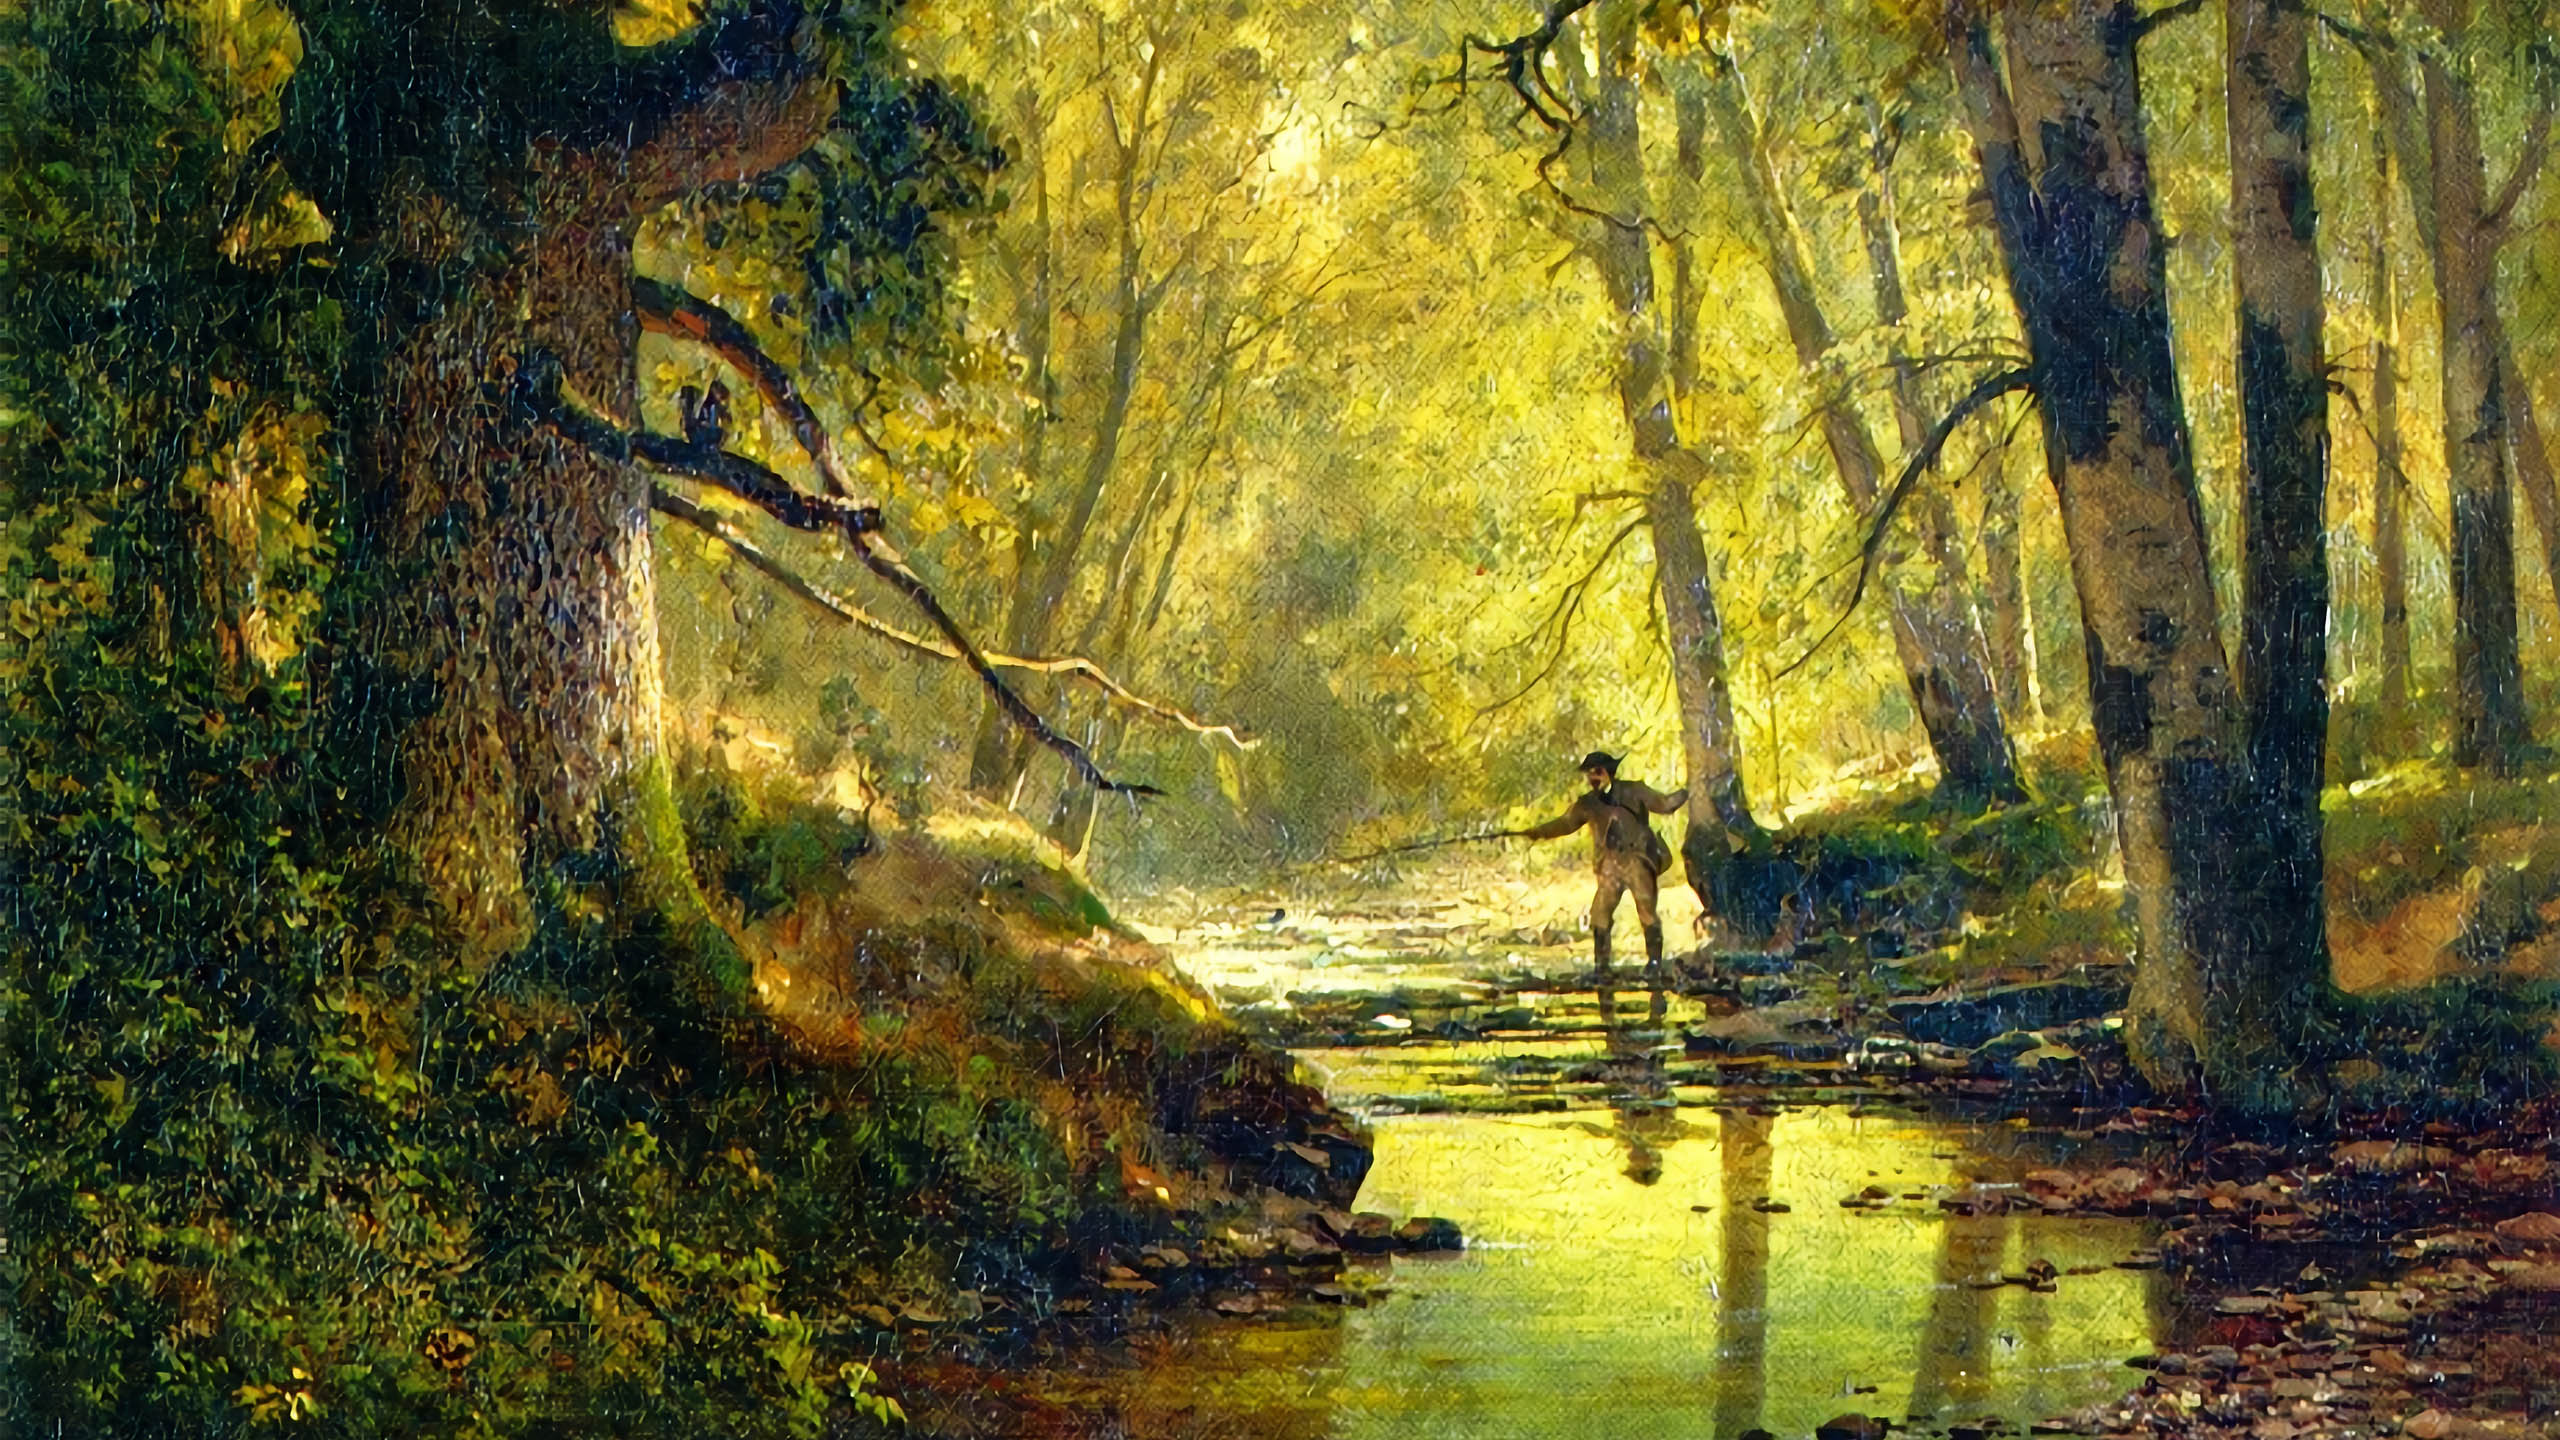 Thomas Hill - Angler in a Forest Interior 2560x1440